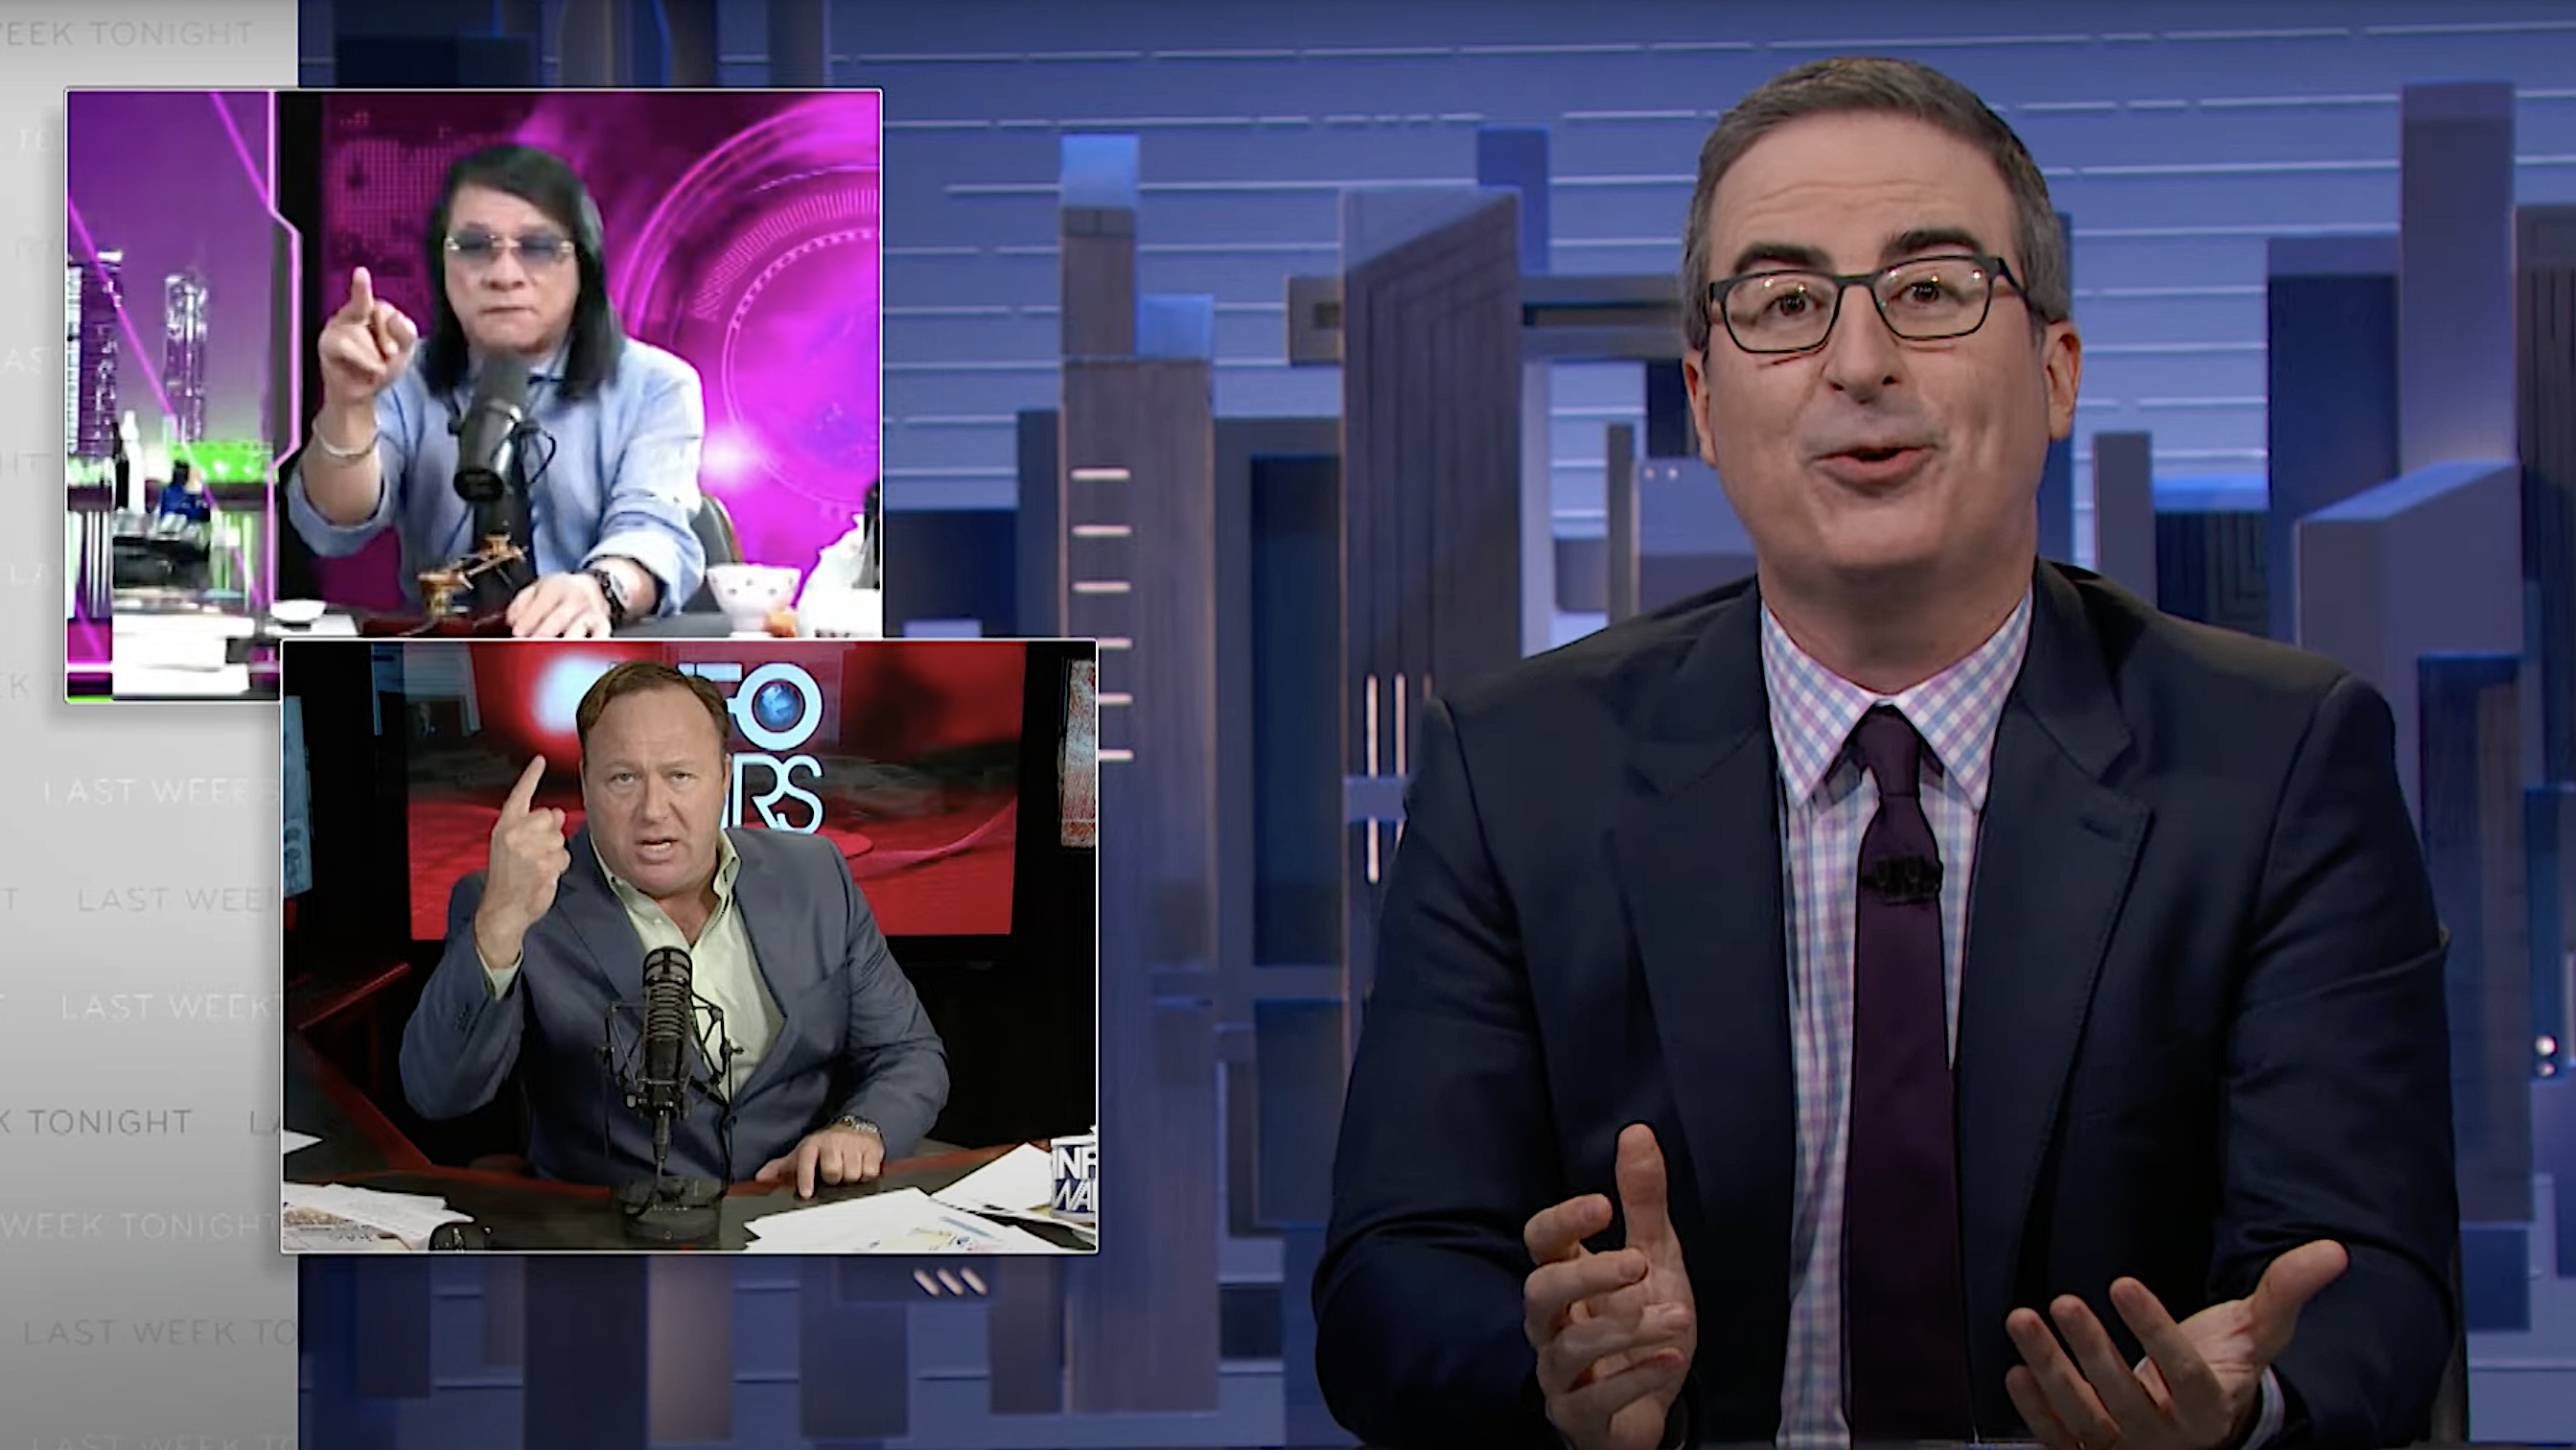 John Oliver reminds viewers that non-English speakers have that one conspiracy nut uncle, too